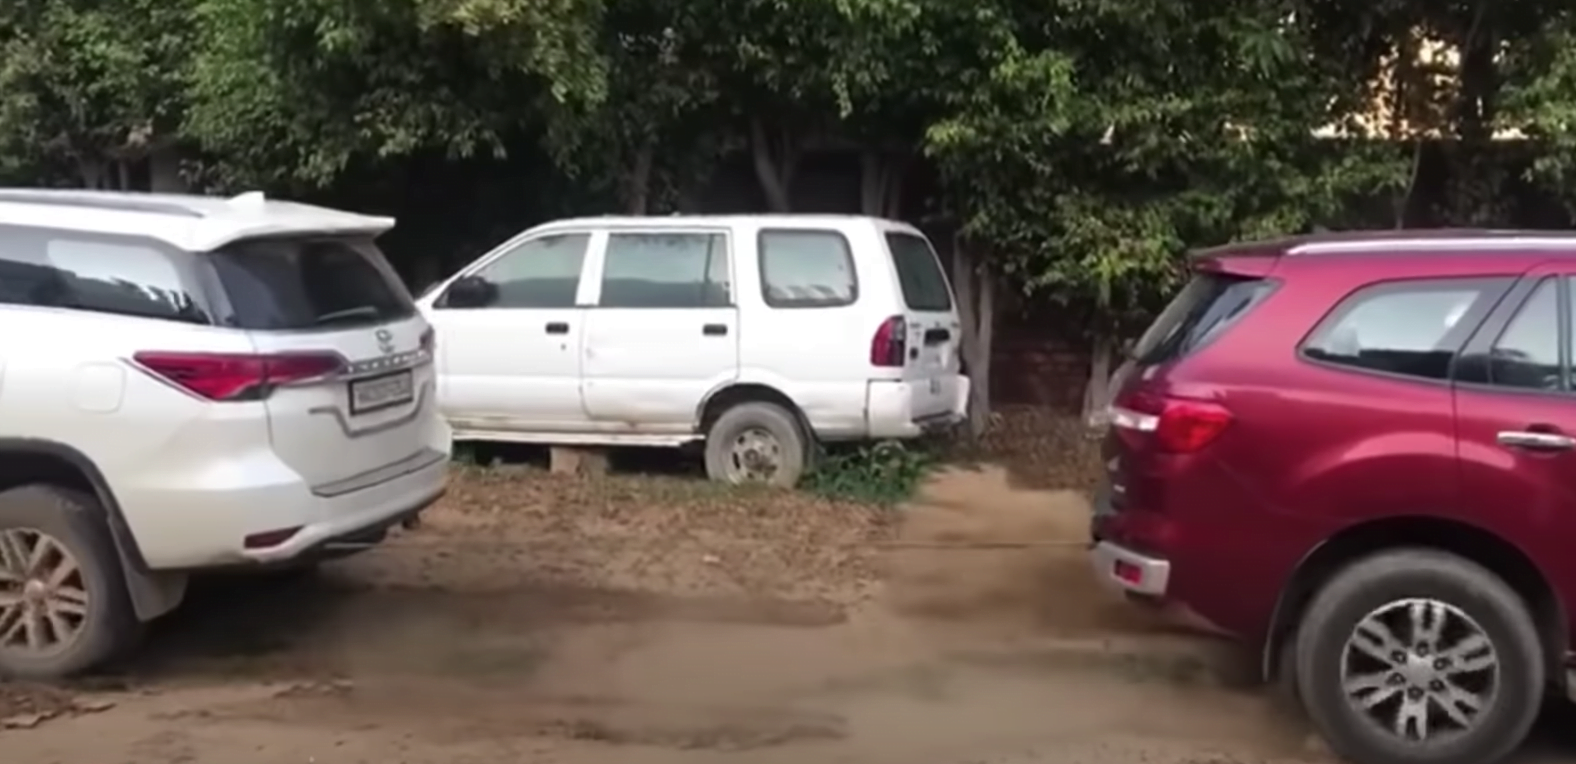 Ford Endeavour Vs Toyota Fortuner Tug Of War - See Unexpected Result